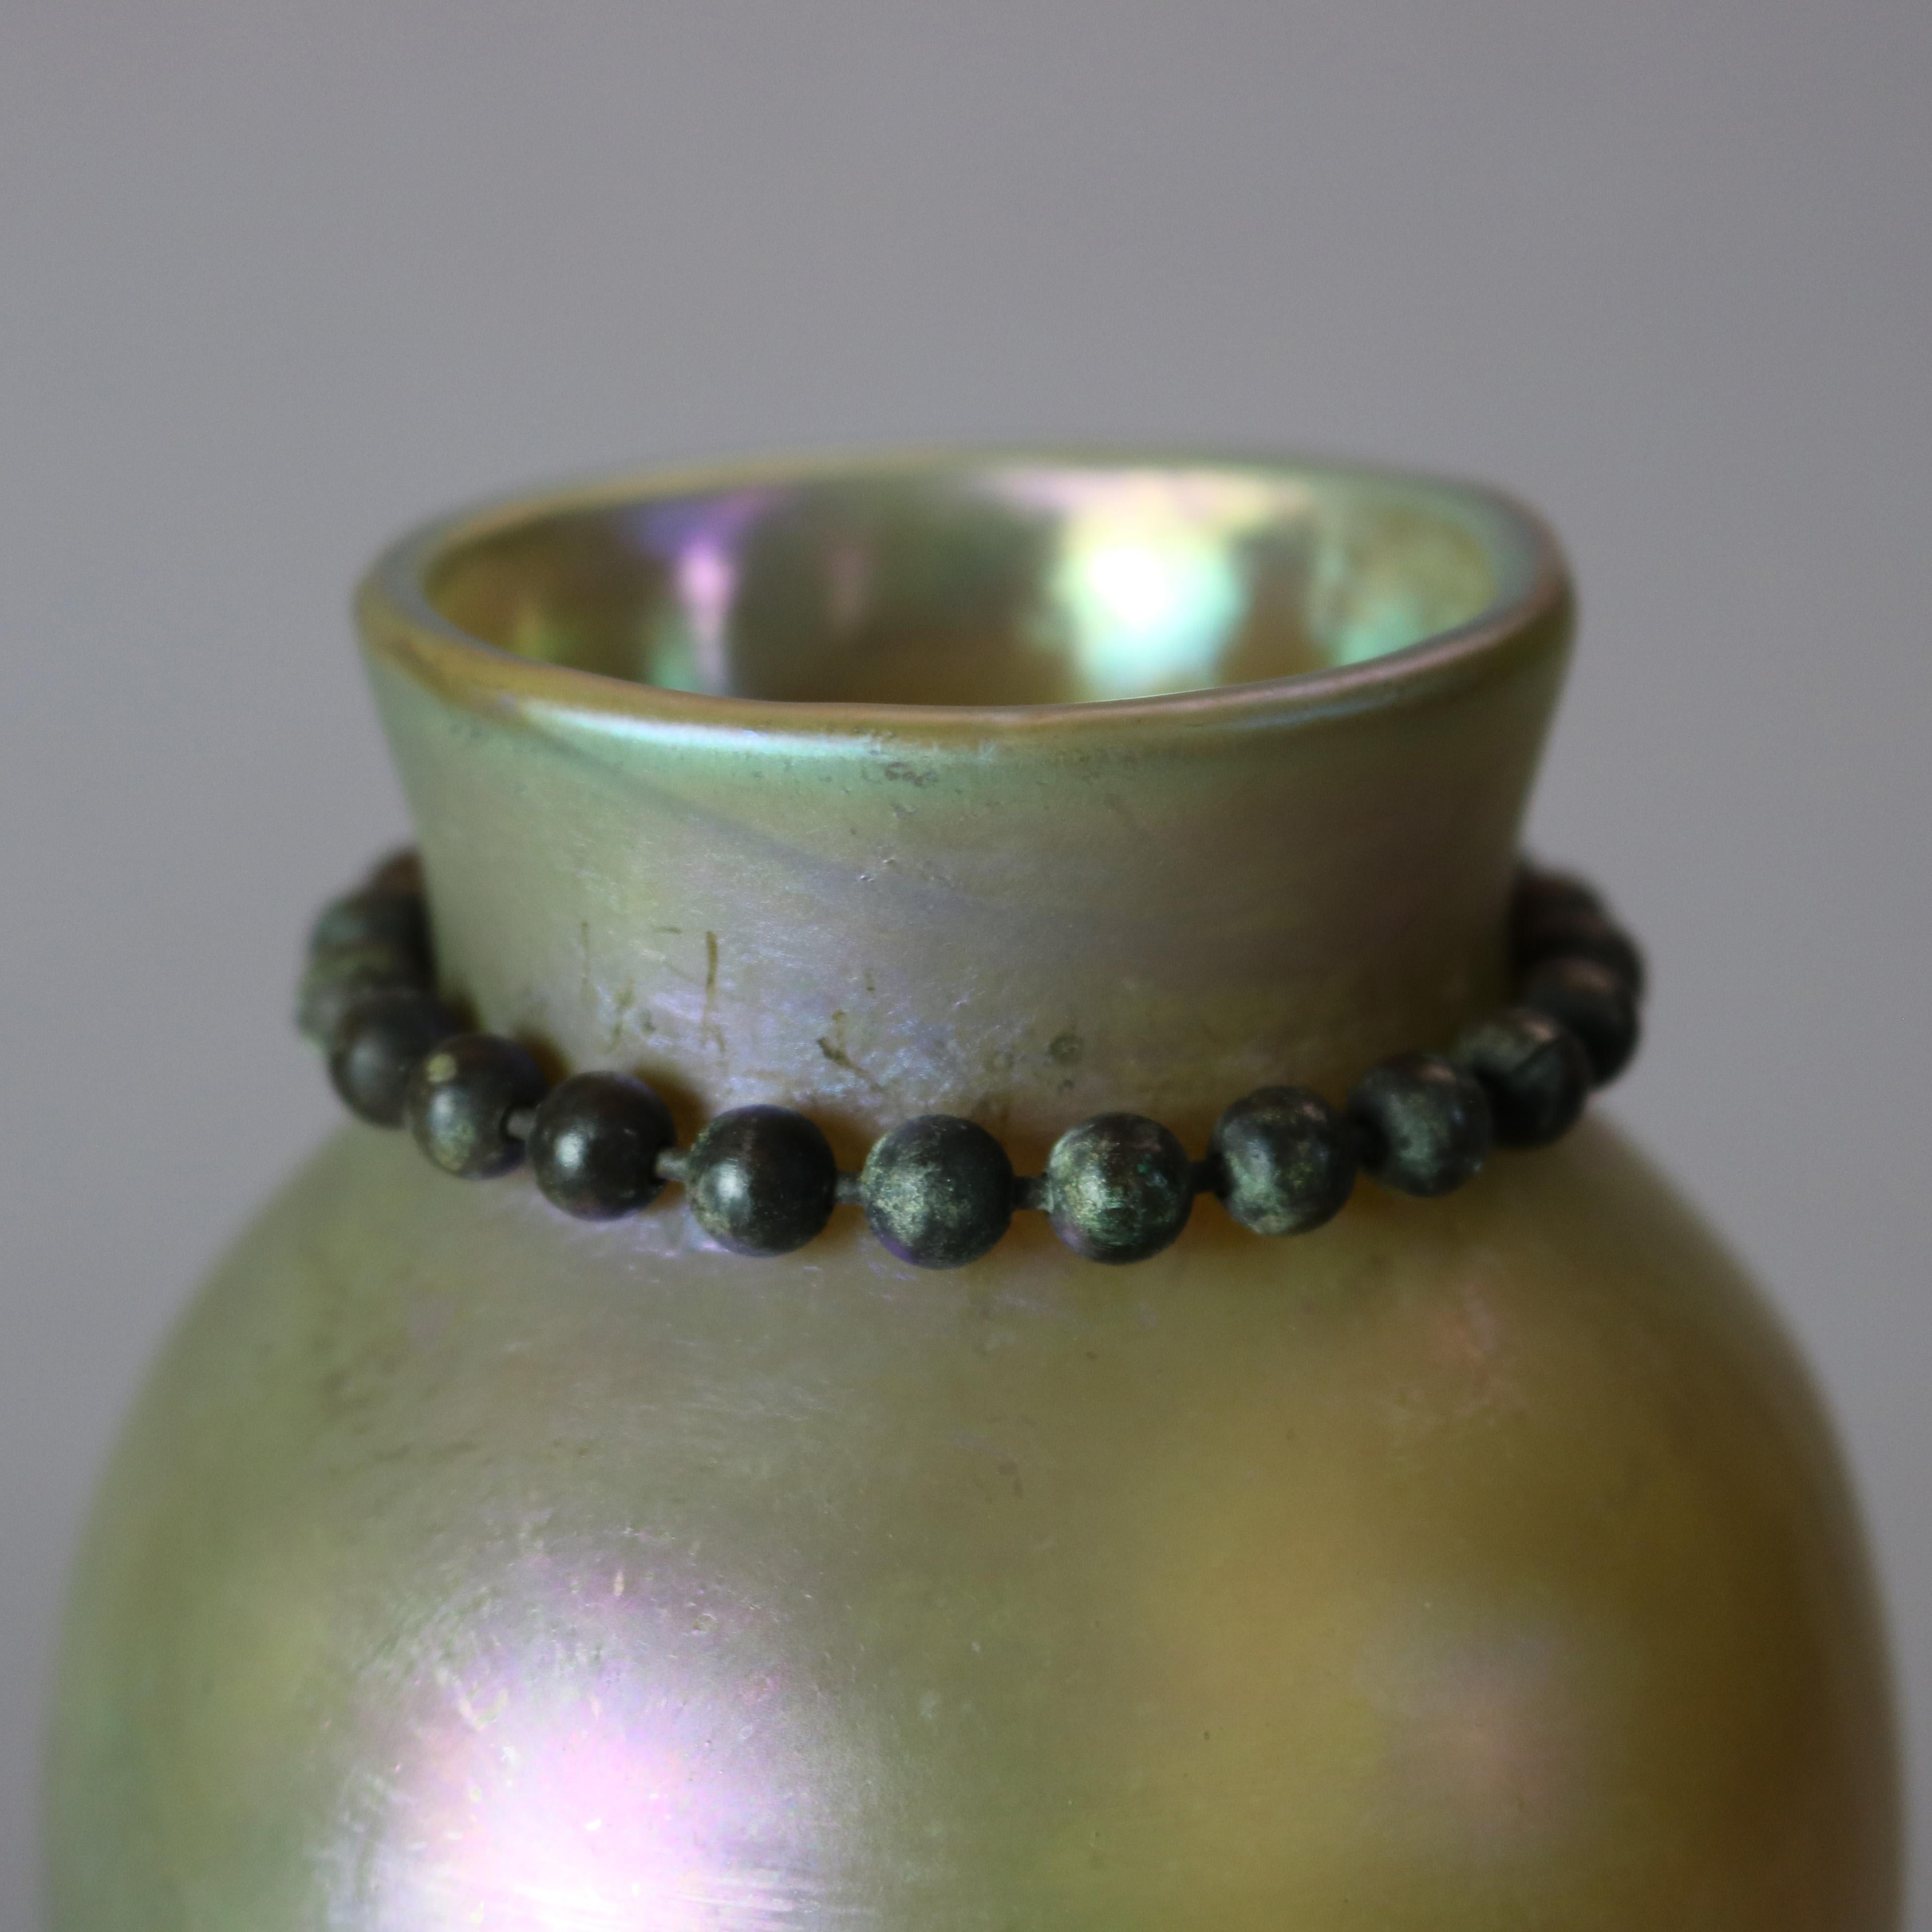 An antique Arts & Crafts vase by Tiffany Studios, New York offers Favrile art glass vessel with bronze bead collar and seated on cast bronze base with beaded collar and incised repeating design, signed on base as photographed, circa